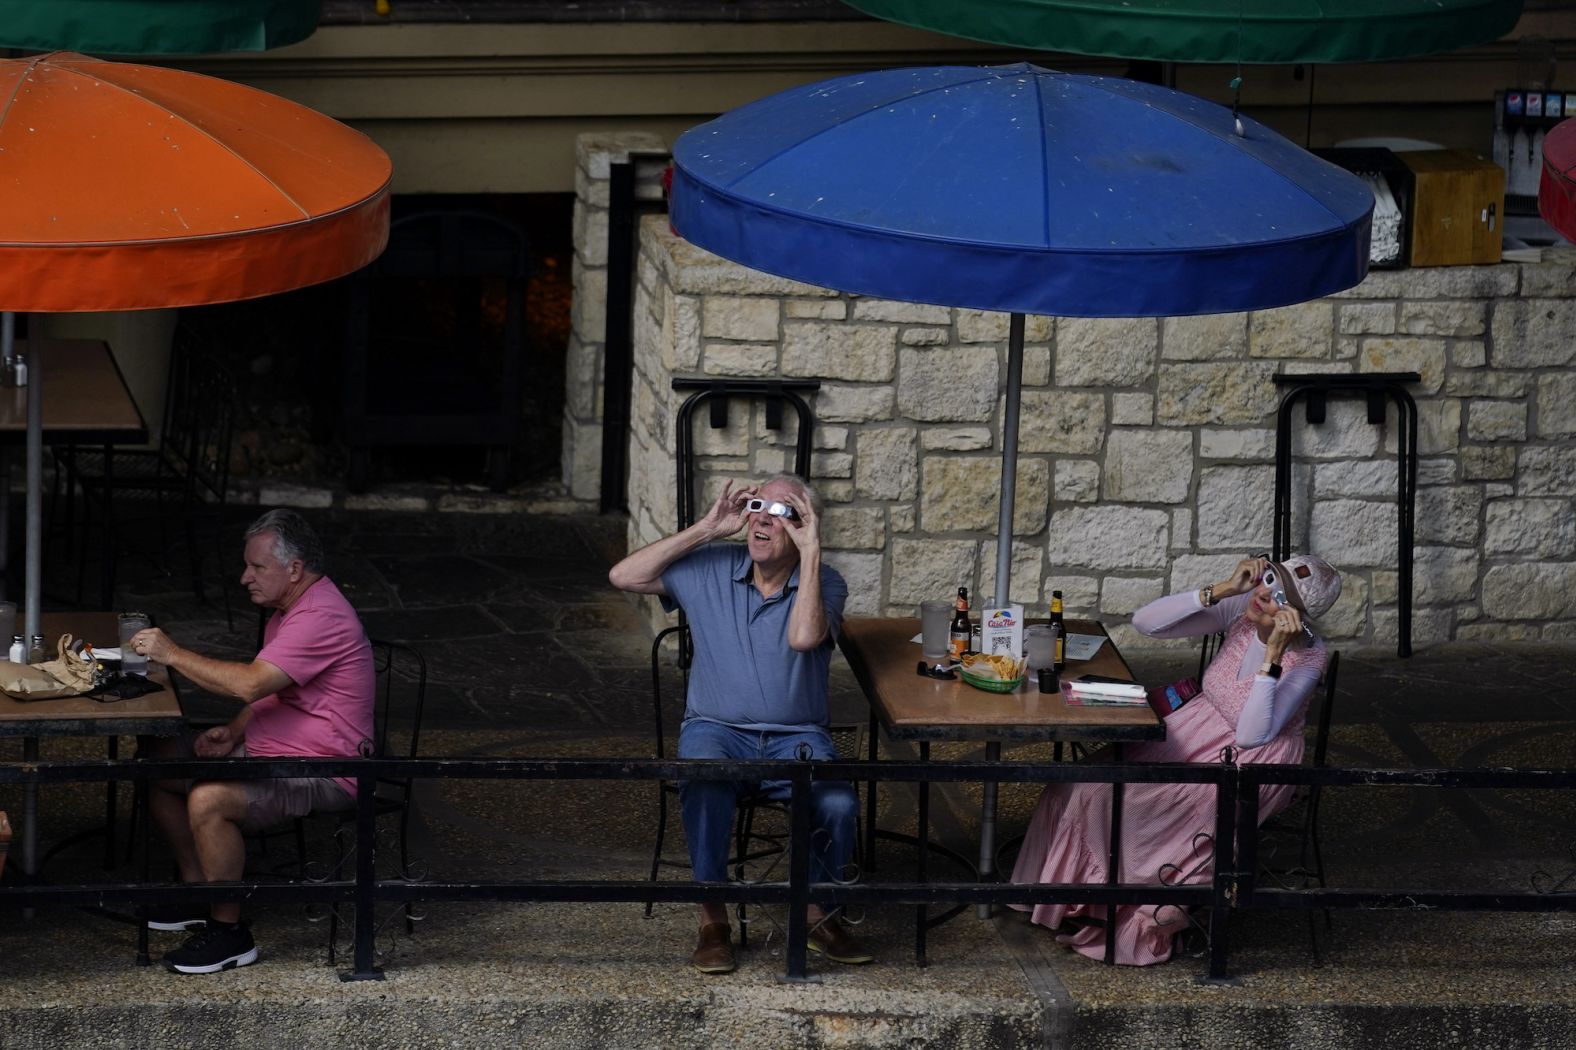 Diners in San Antonio, Texas, observe the eclipse through protective glasses.